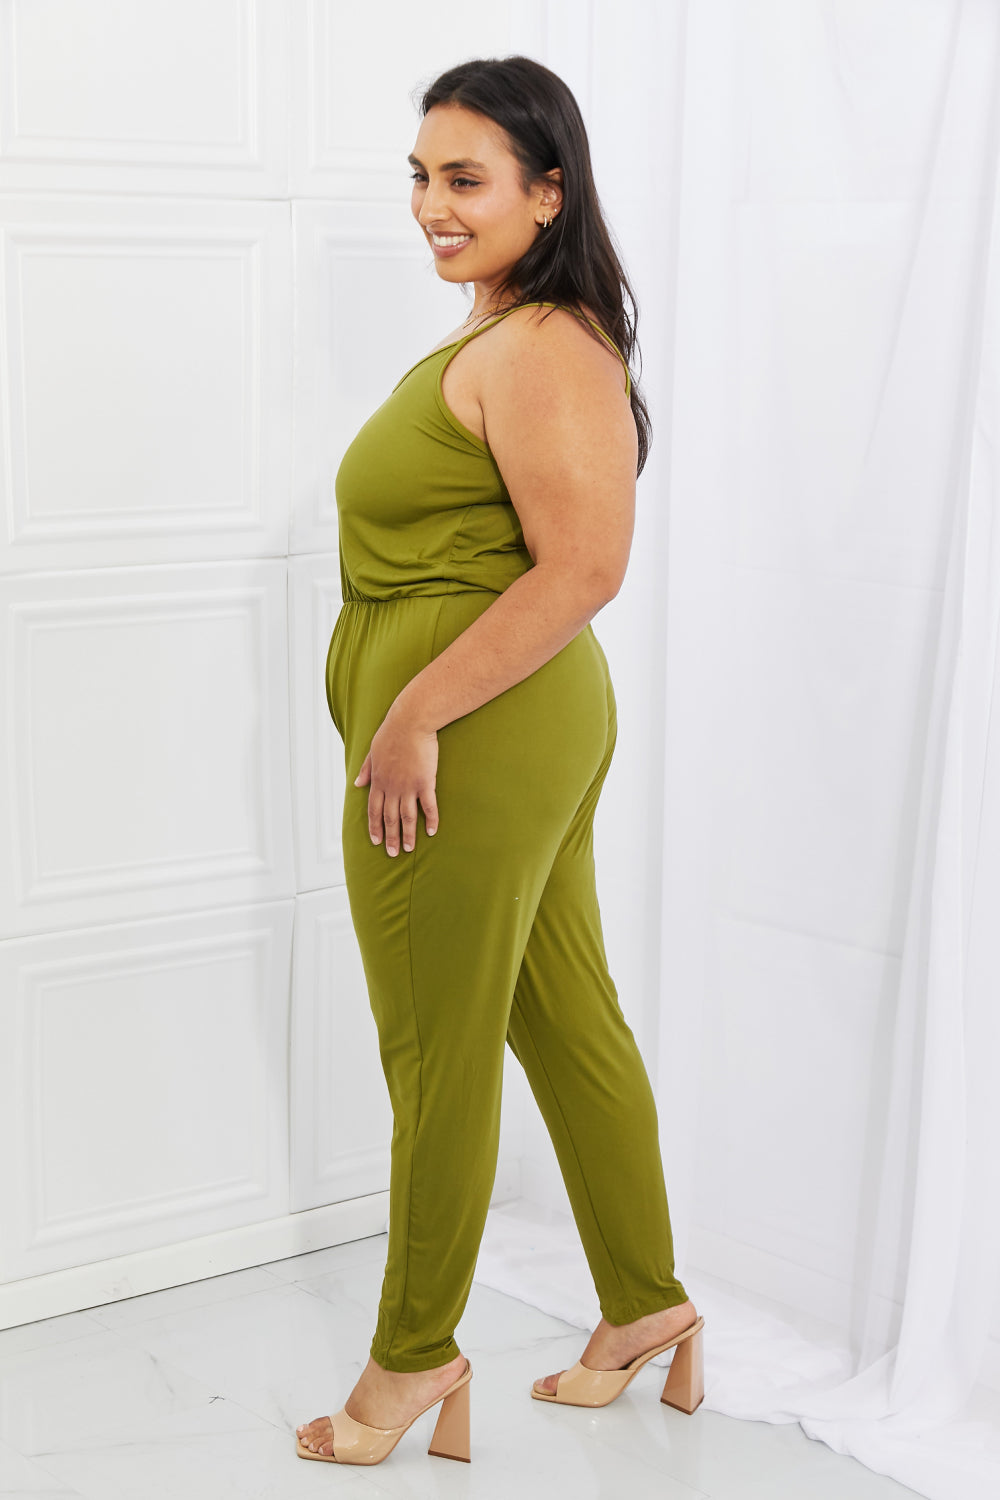 Capella Comfy Casual Full Size Solid Elastic Waistband Jumpsuit in Chartreuse- ONLINE ONLY 2-7 DAY SHIP